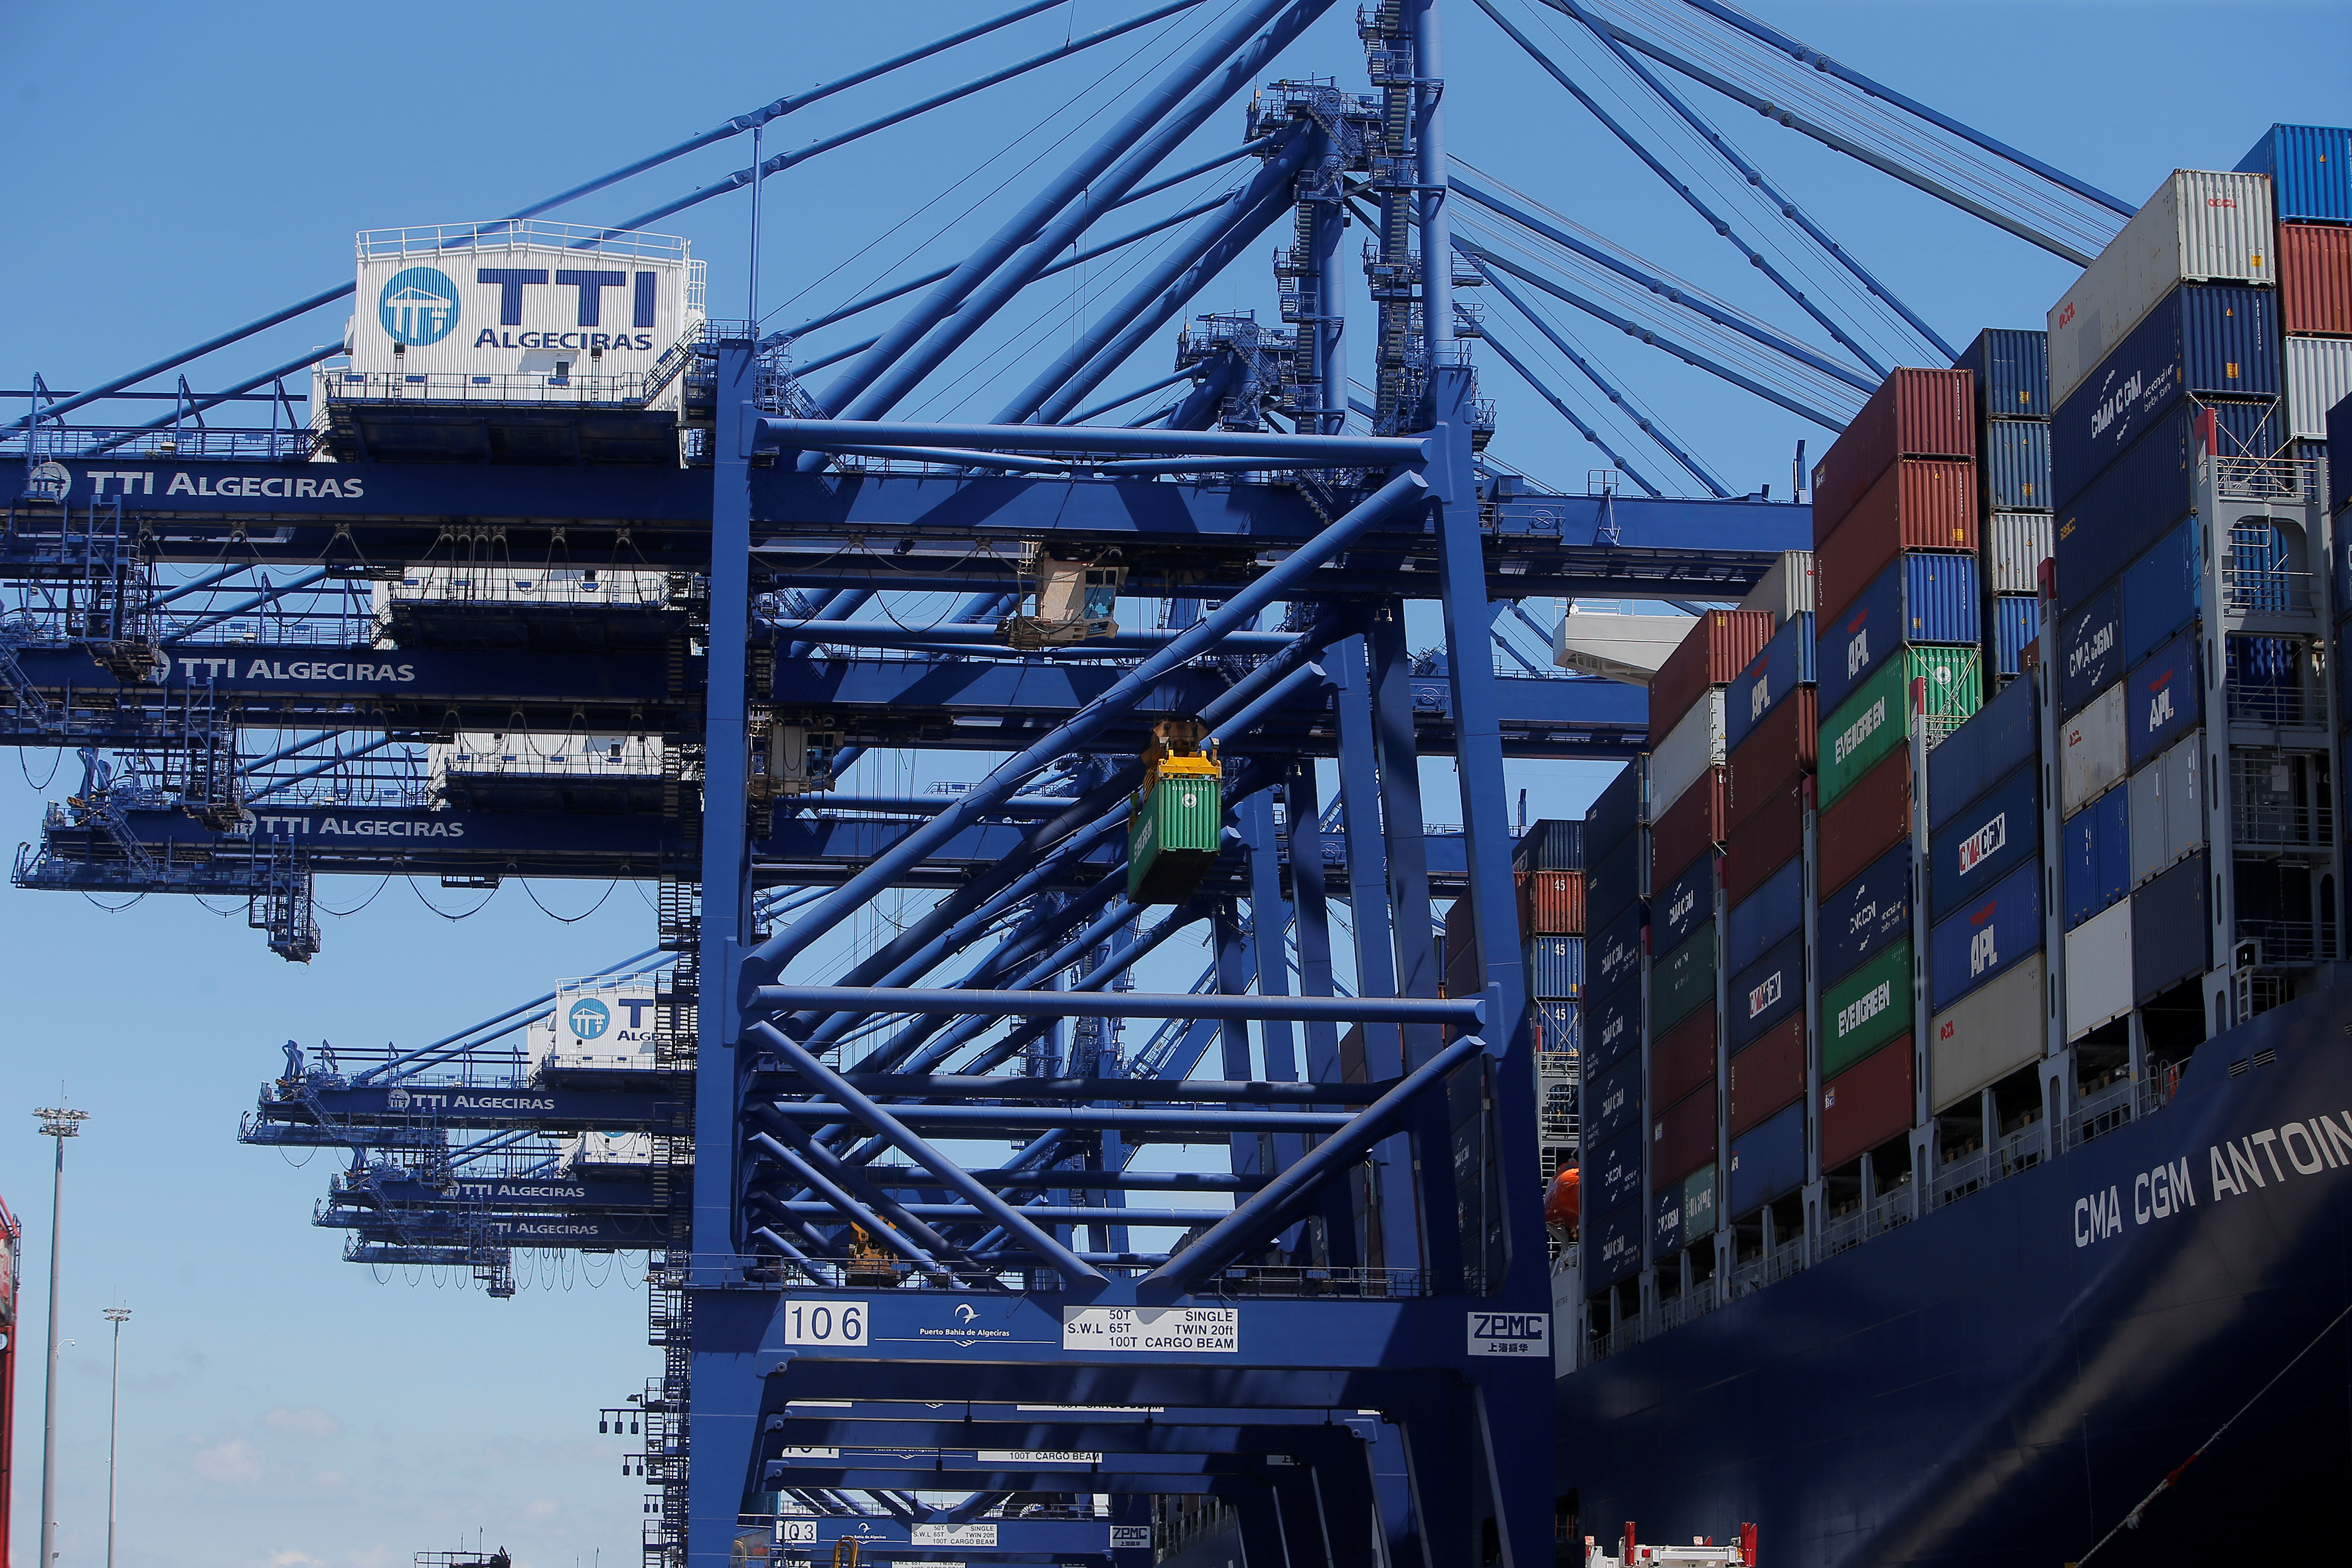 A crane loads a container on the mega cargo ship "Antoine de Saint Exupery" of the French shipping company CMA CGM at the Total Terminal International Algeciras (TTIA) before leaving the port of Algeciras, Spain May 31, 2018. (Jon Nazca—Reuters)